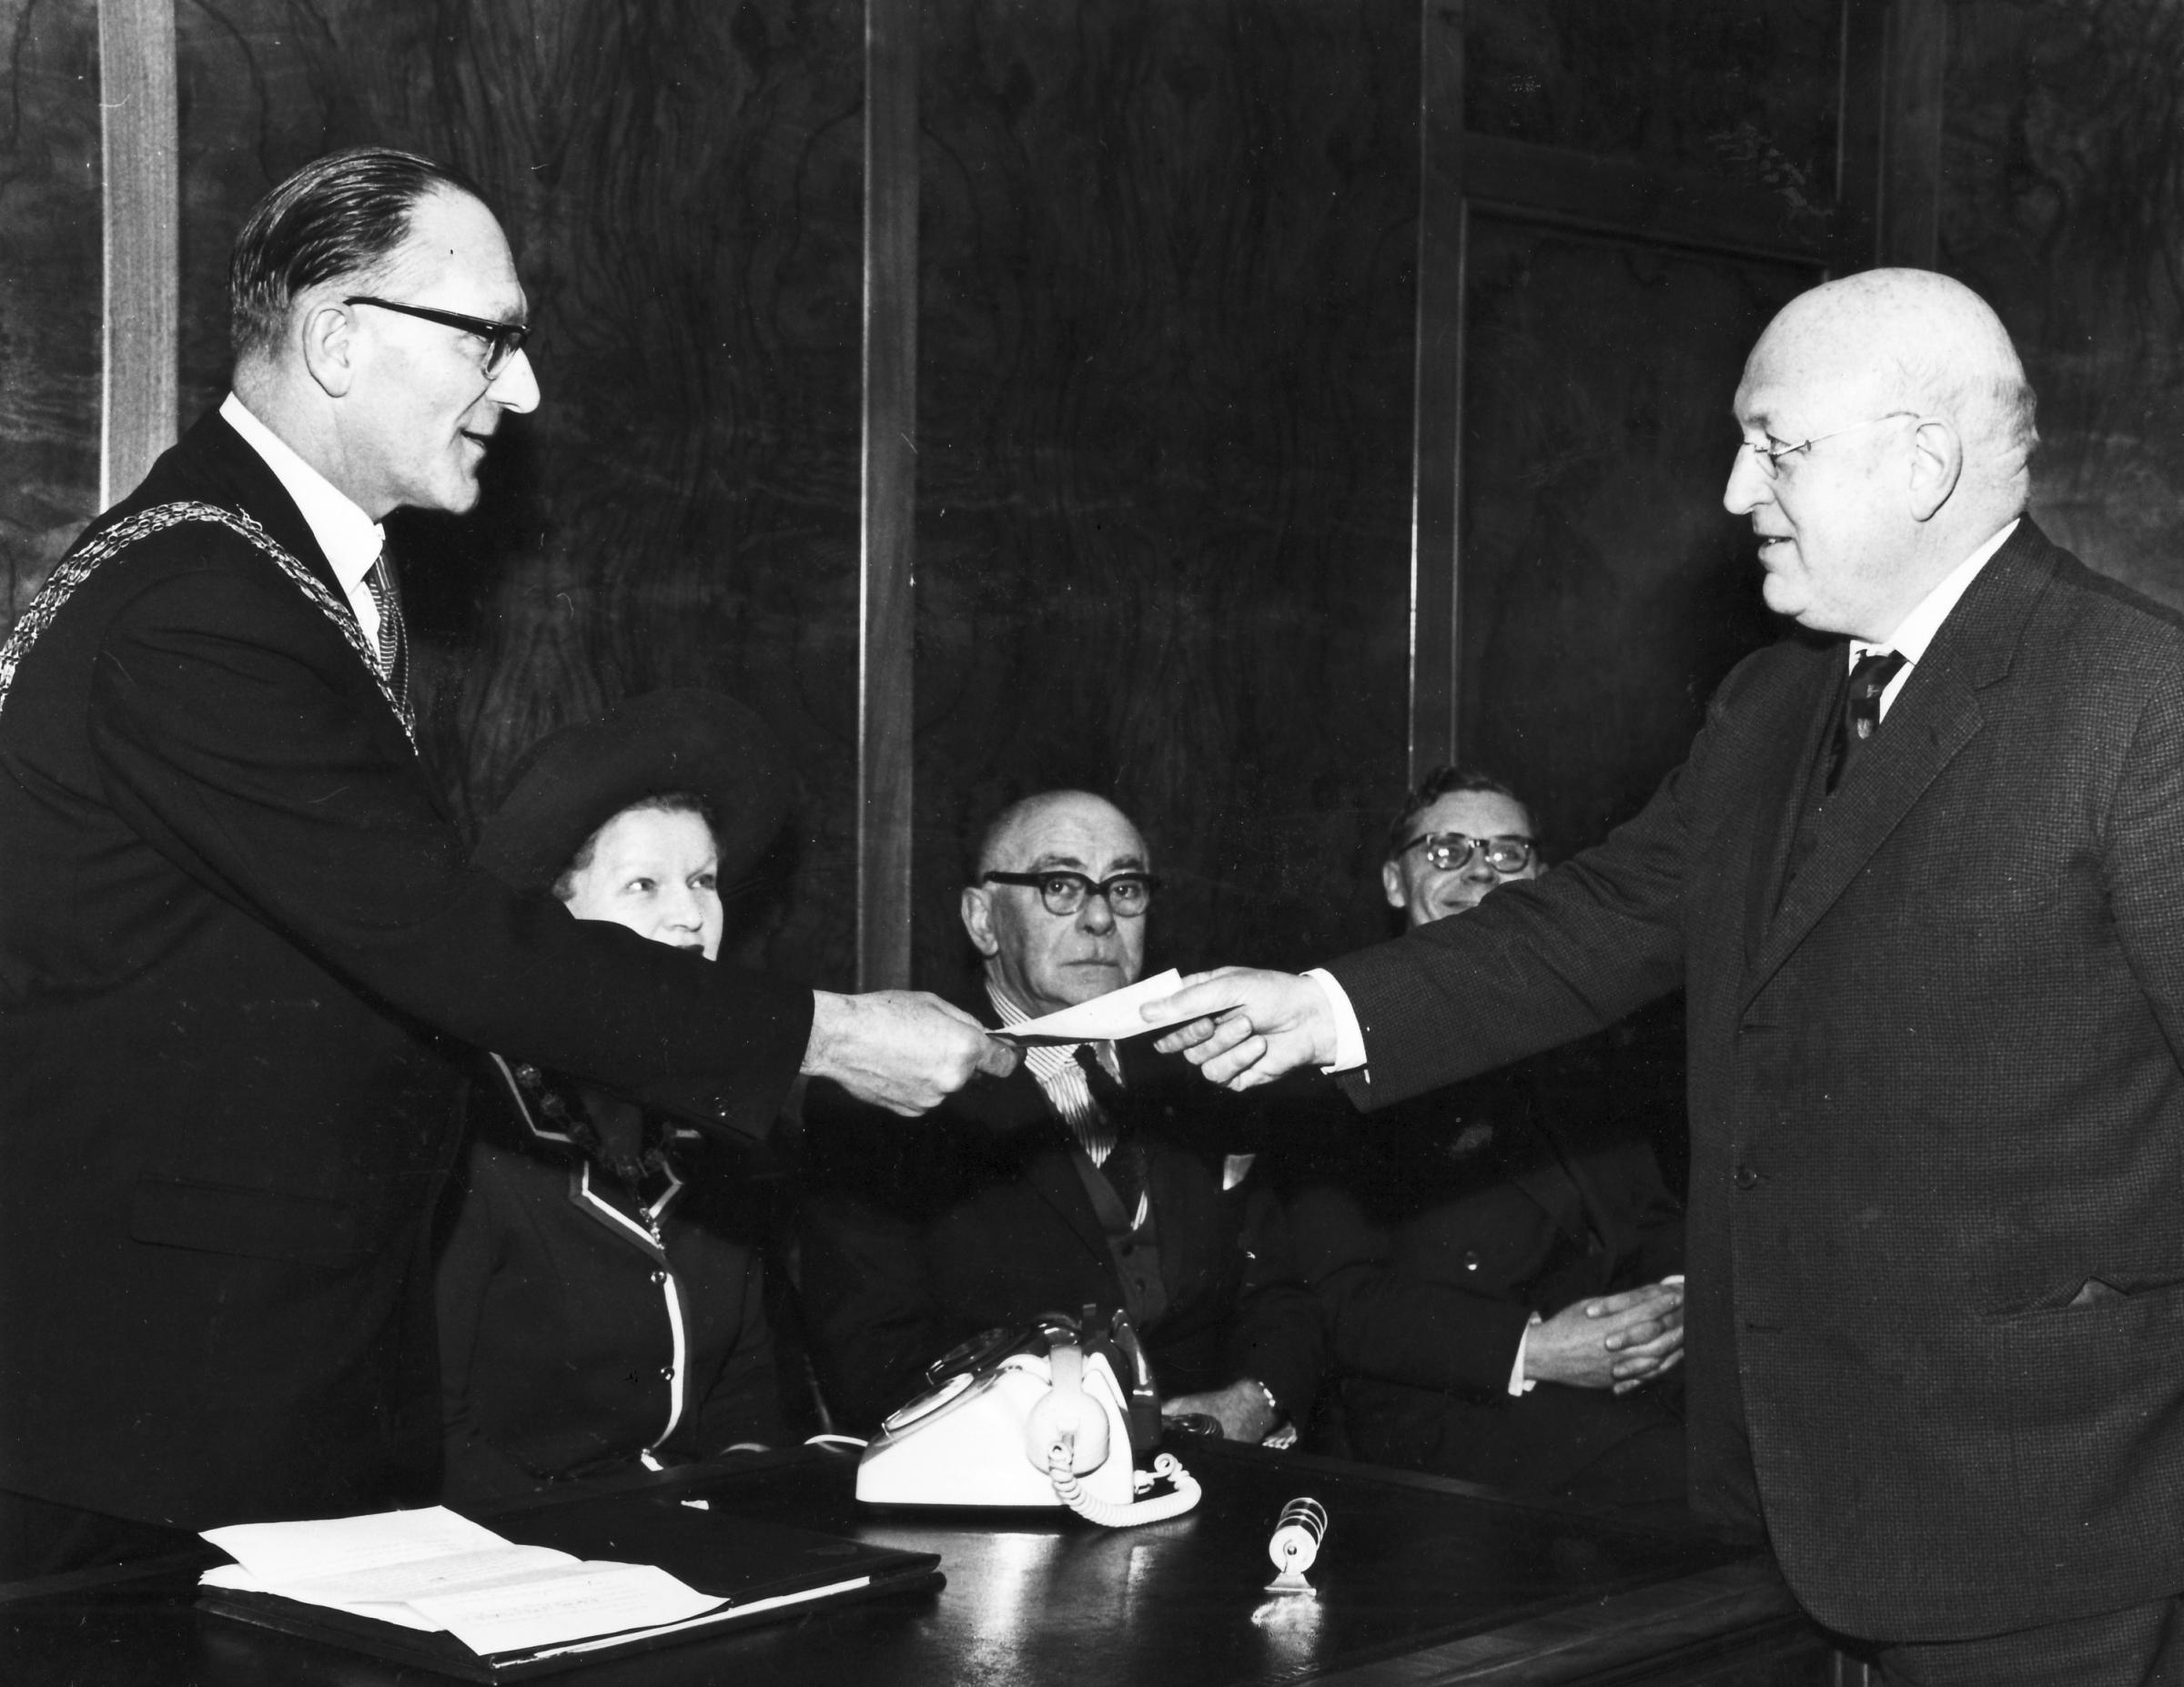 Southampton City Status Ceremony, 11 Februuary 1964. Town clerk Norman Scholfield hand the city charter to the Mayor of Southampton Alderman Ronald Pugh. Southern Daily Echo Archives. Neg ref. 3418D/3